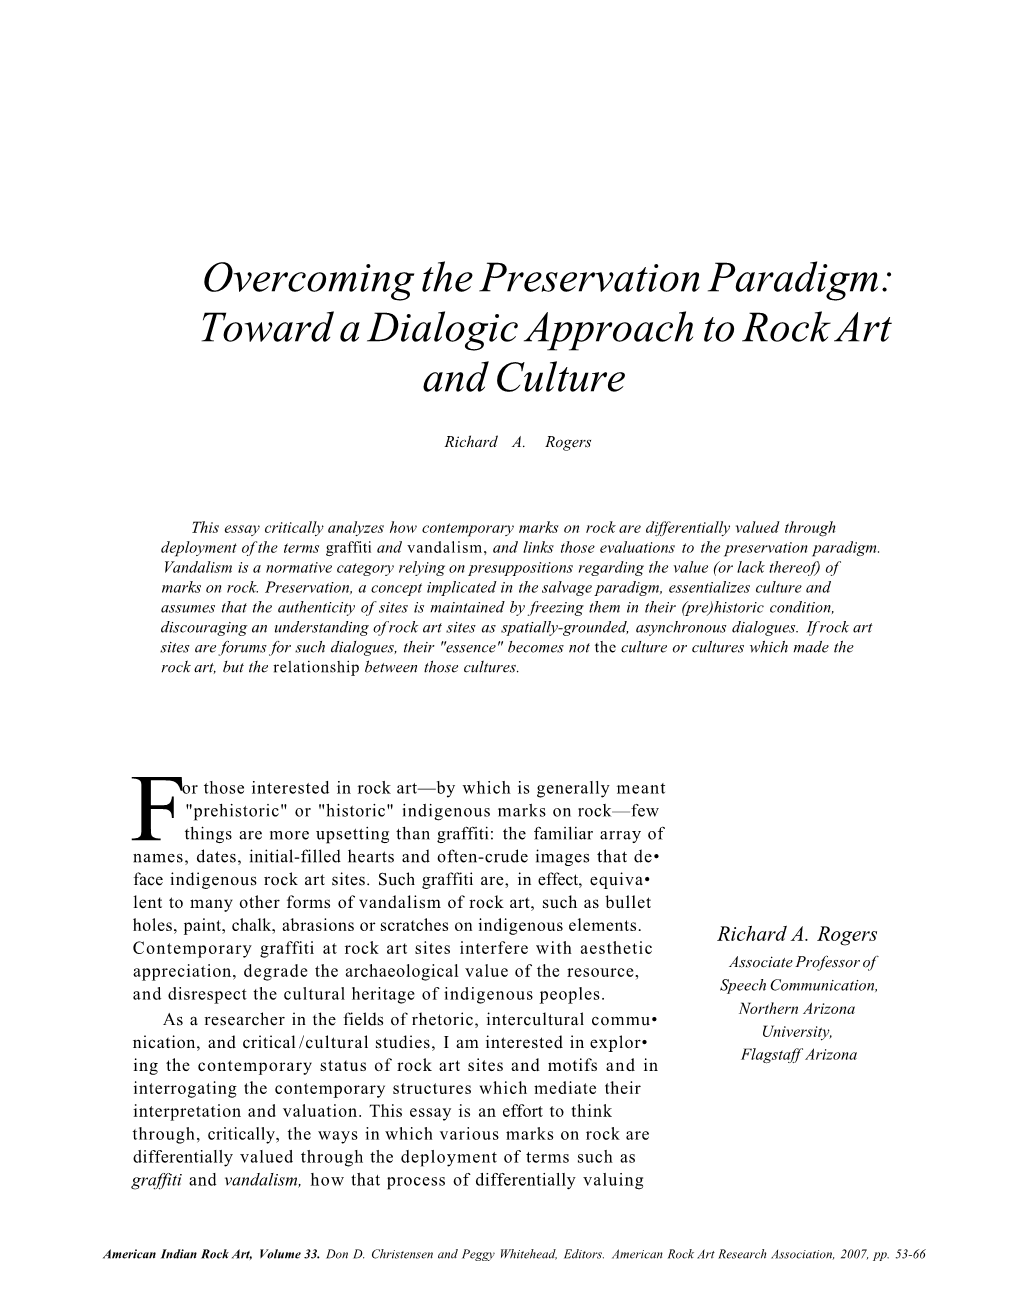 Overcoming the Preservation Paradigm: Toward a Dialogic Approach to Rock Art and Culture